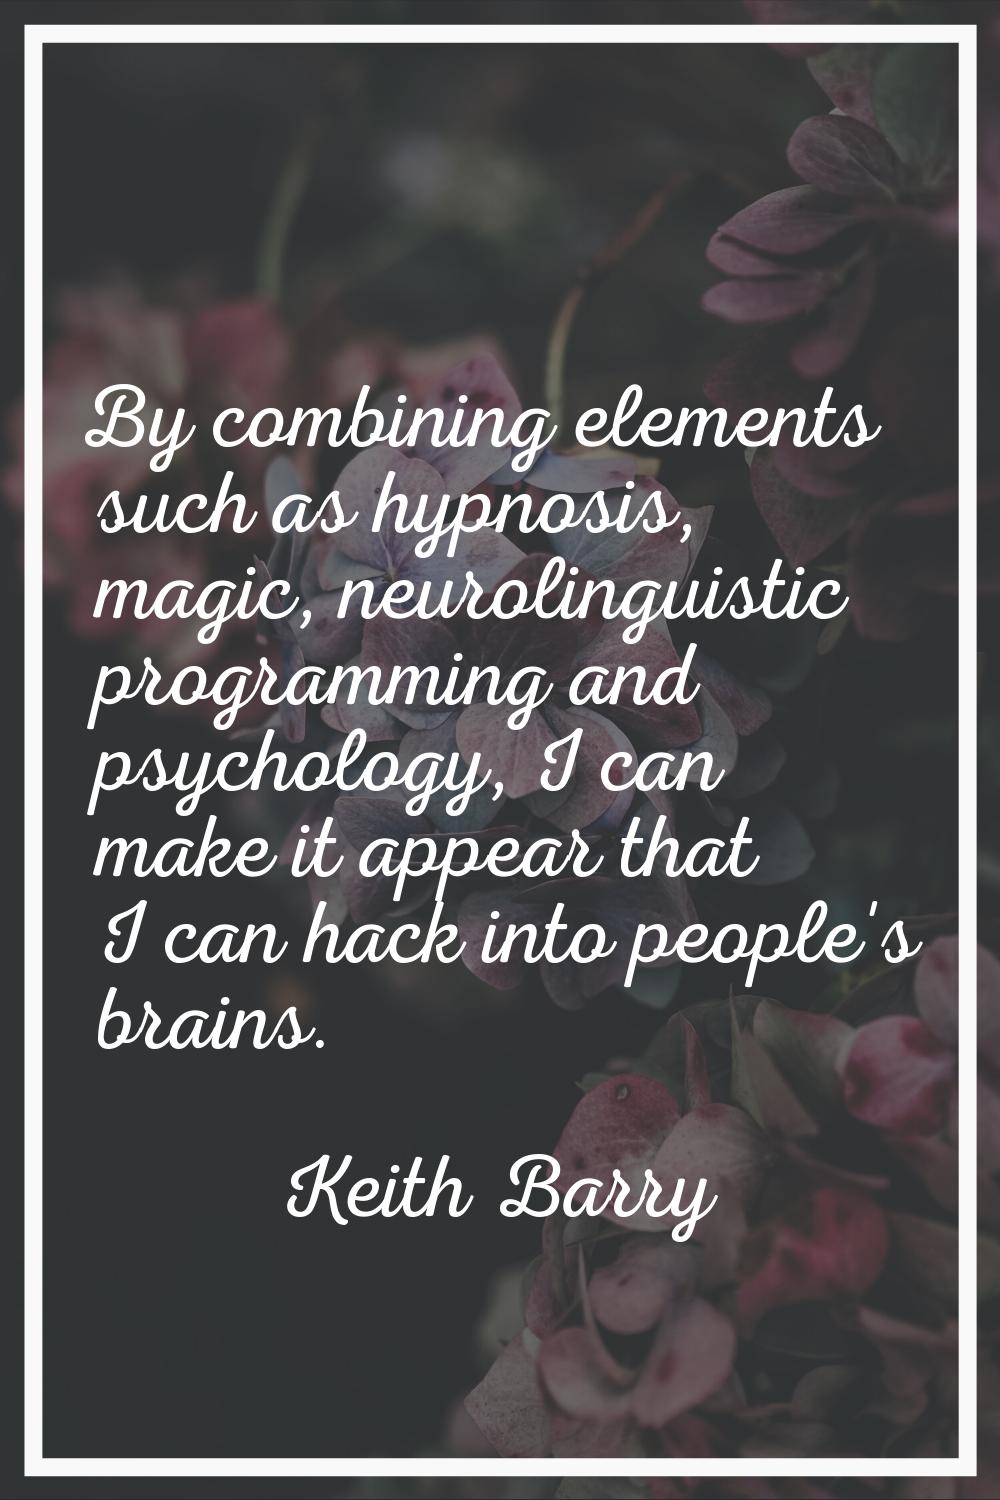 By combining elements such as hypnosis, magic, neurolinguistic programming and psychology, I can ma